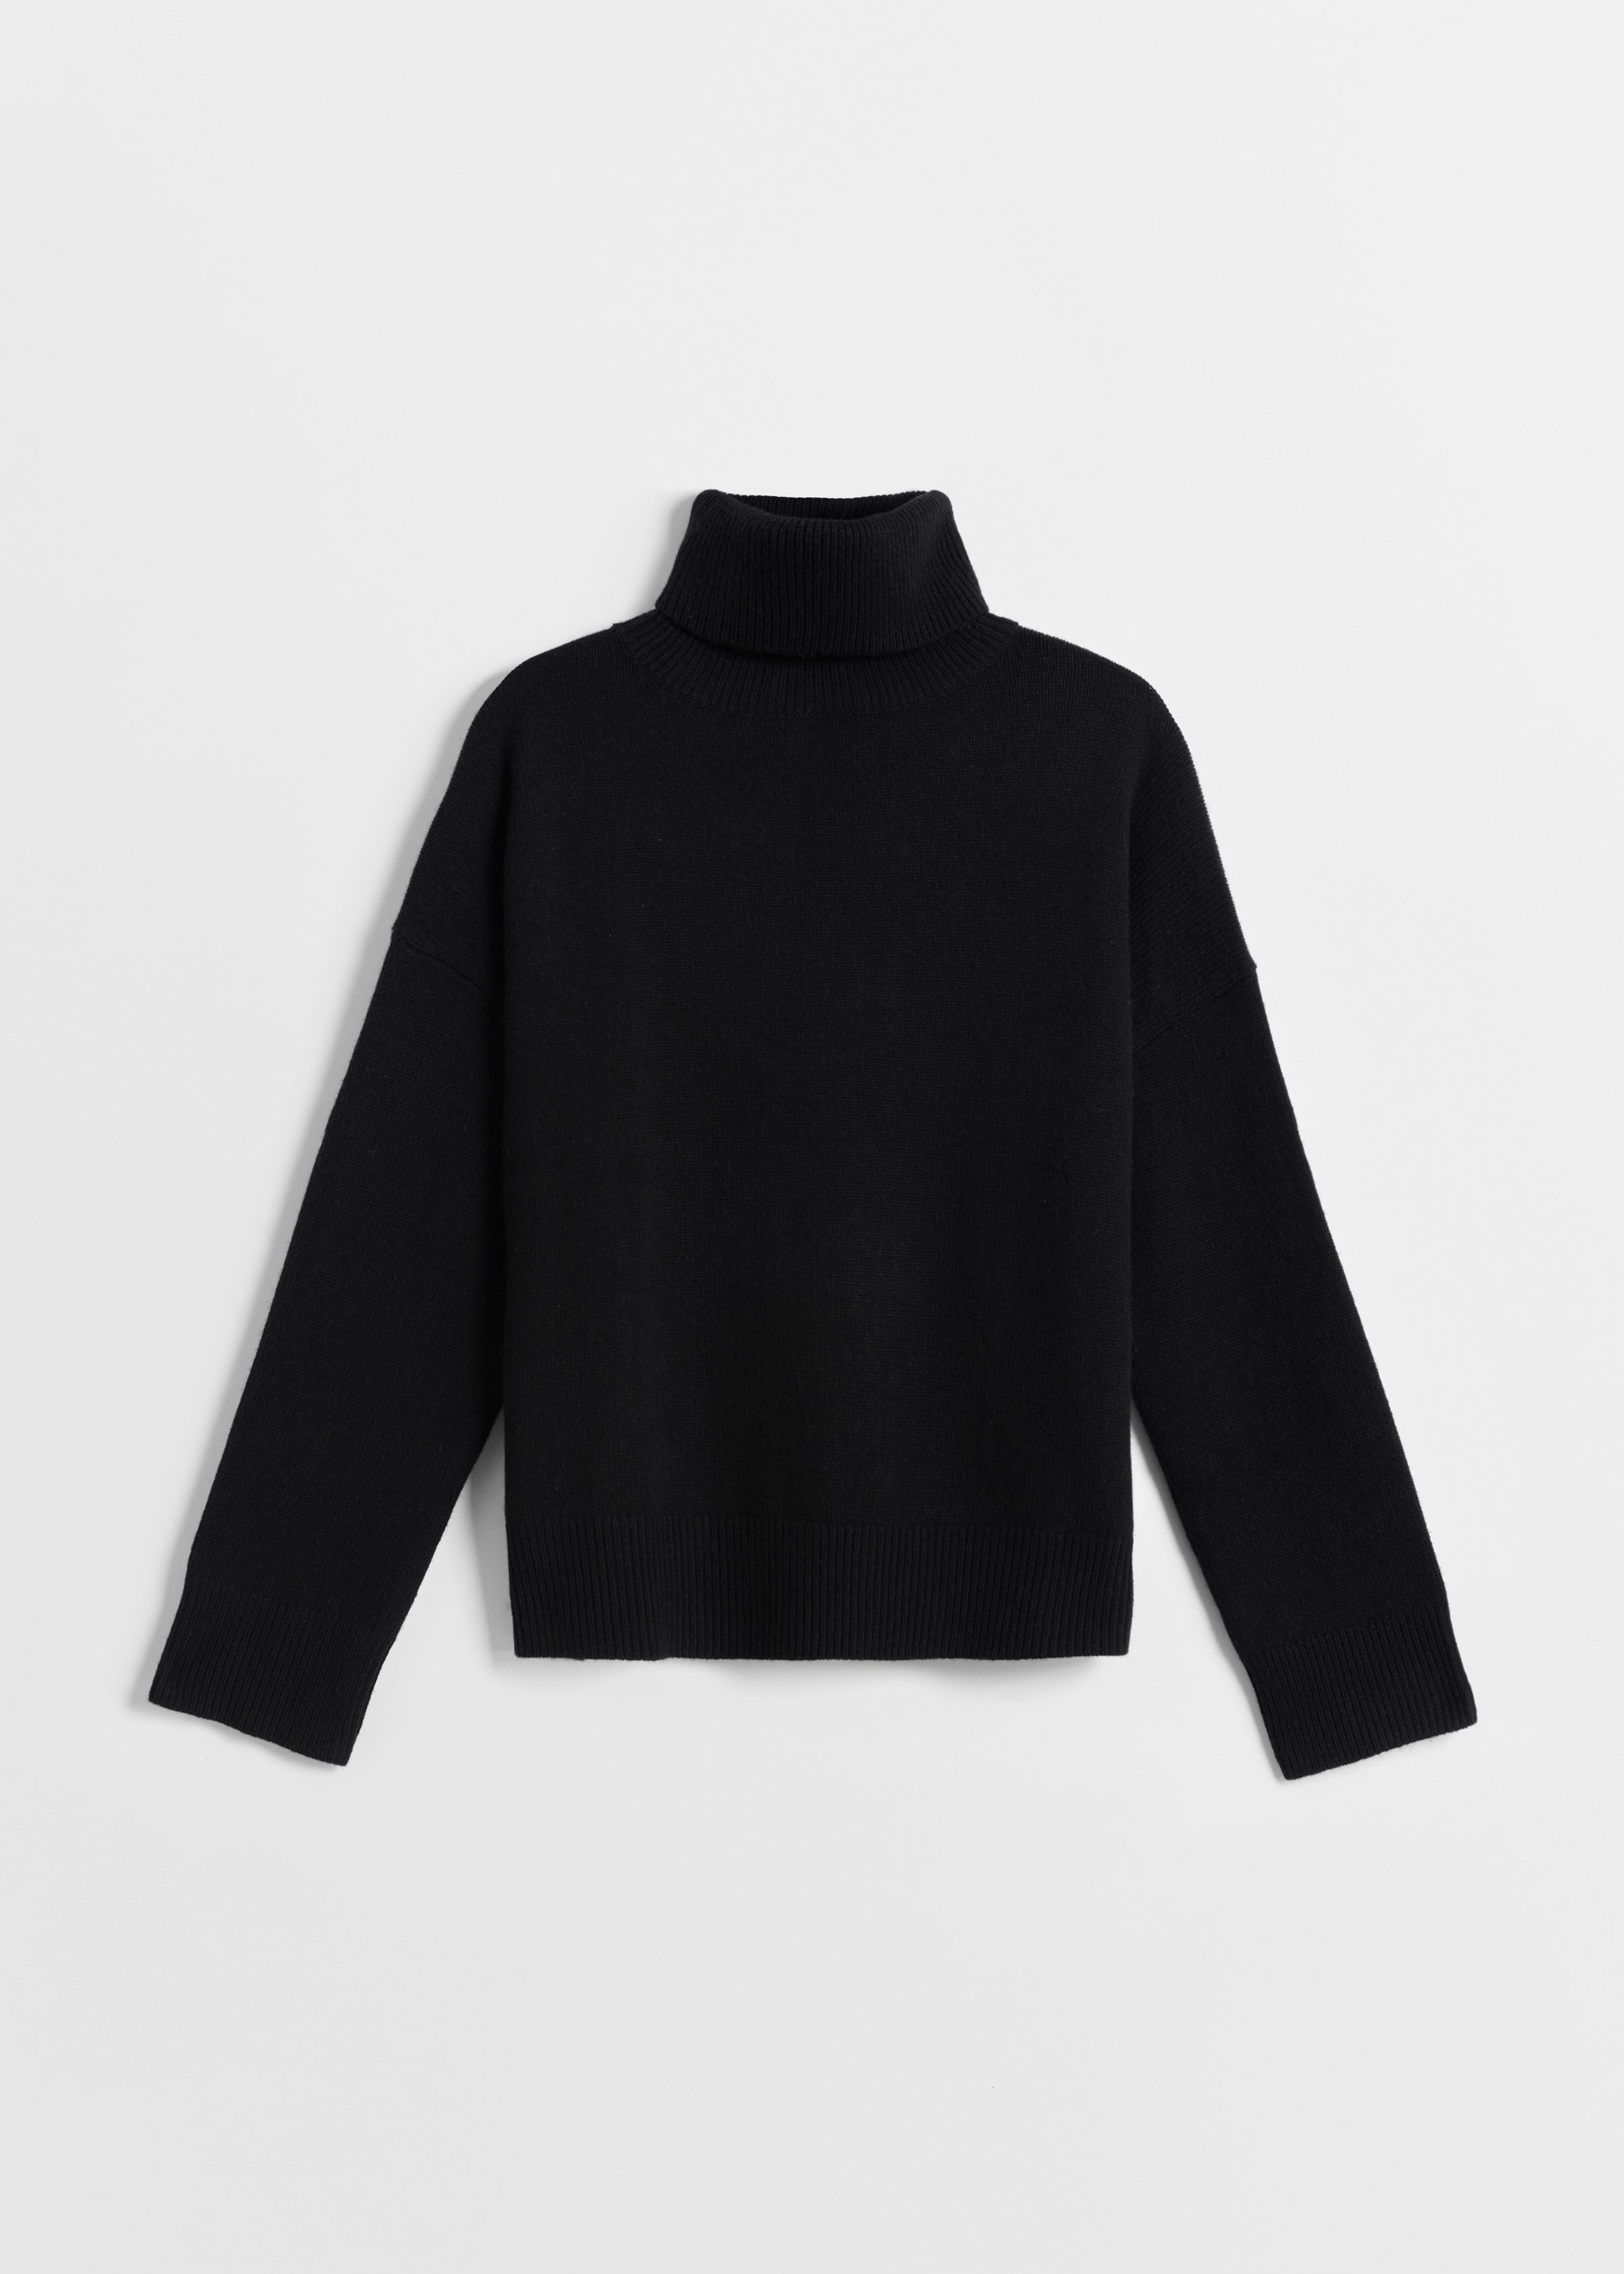 CO - Boxy Turtleneck Sweater in Wool Cashmere - Black